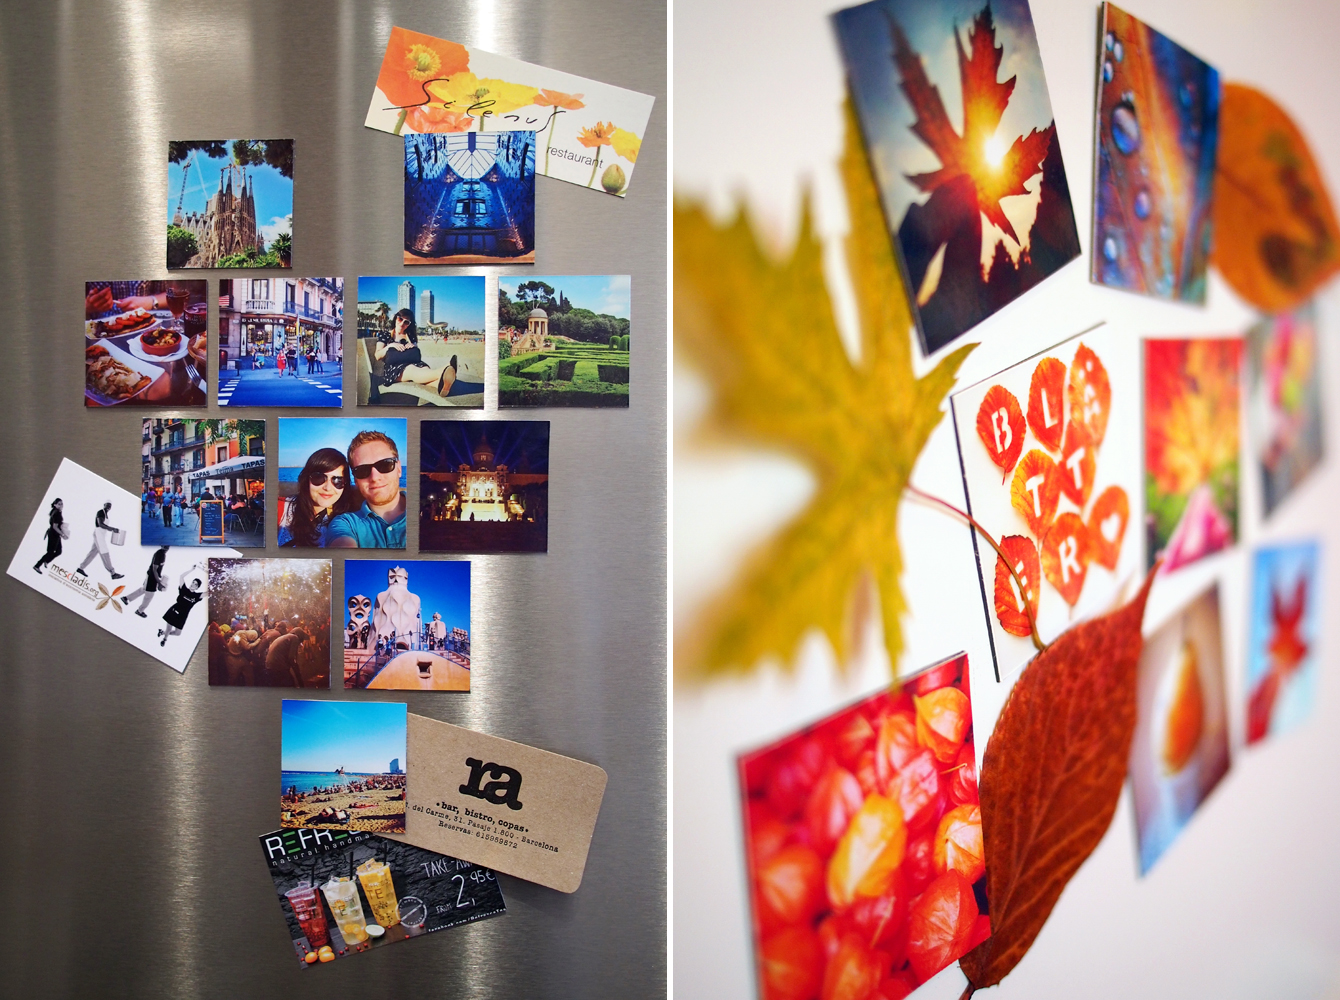 Instagram-Magnete DIY - "Fee ist mein Name" / How to make your own instagram magnets